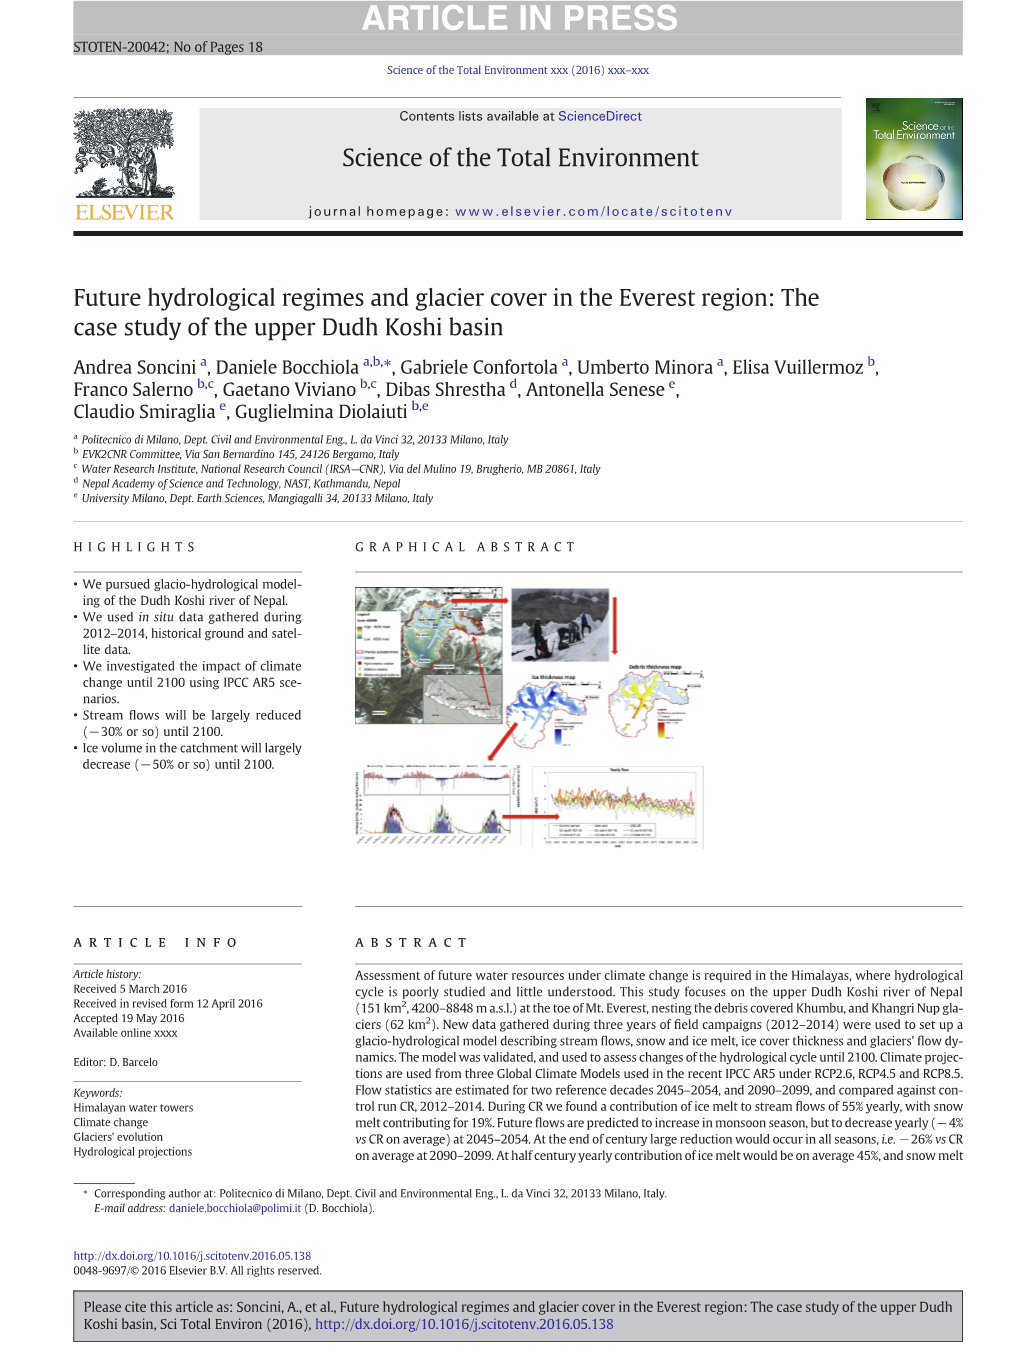 Future Hydrological Regimes and Glacier Cover in the Everest Region: the Case Study of the Upper Dudh Koshi Basin